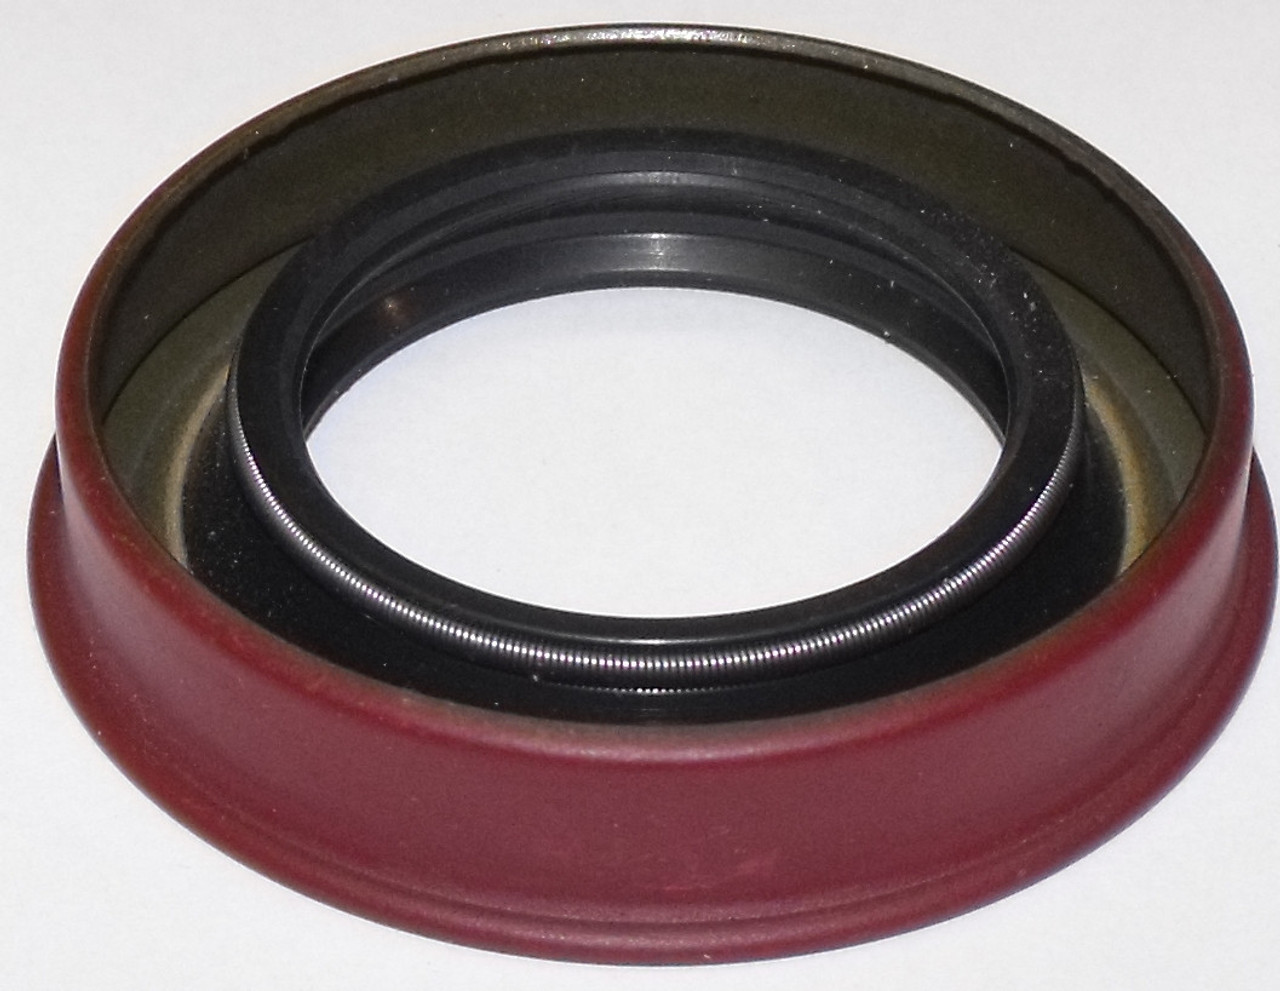 Extension Housing, Drive Shaft Seal w/ Flange, 700R4|4L60E|4L65E|Powerglide(Aluminum)|TH350|TH350C|TH250/C|C4|C5|AOD(1980-1993)|Ford-O-Matic|FX|MX|BW-12|TH180/C(1969-1986)|TH200|TH200C|TH200-4R|ST300|TH400 (1972-1976)(2.381" OD)|BW35(USA)(1962-1971)